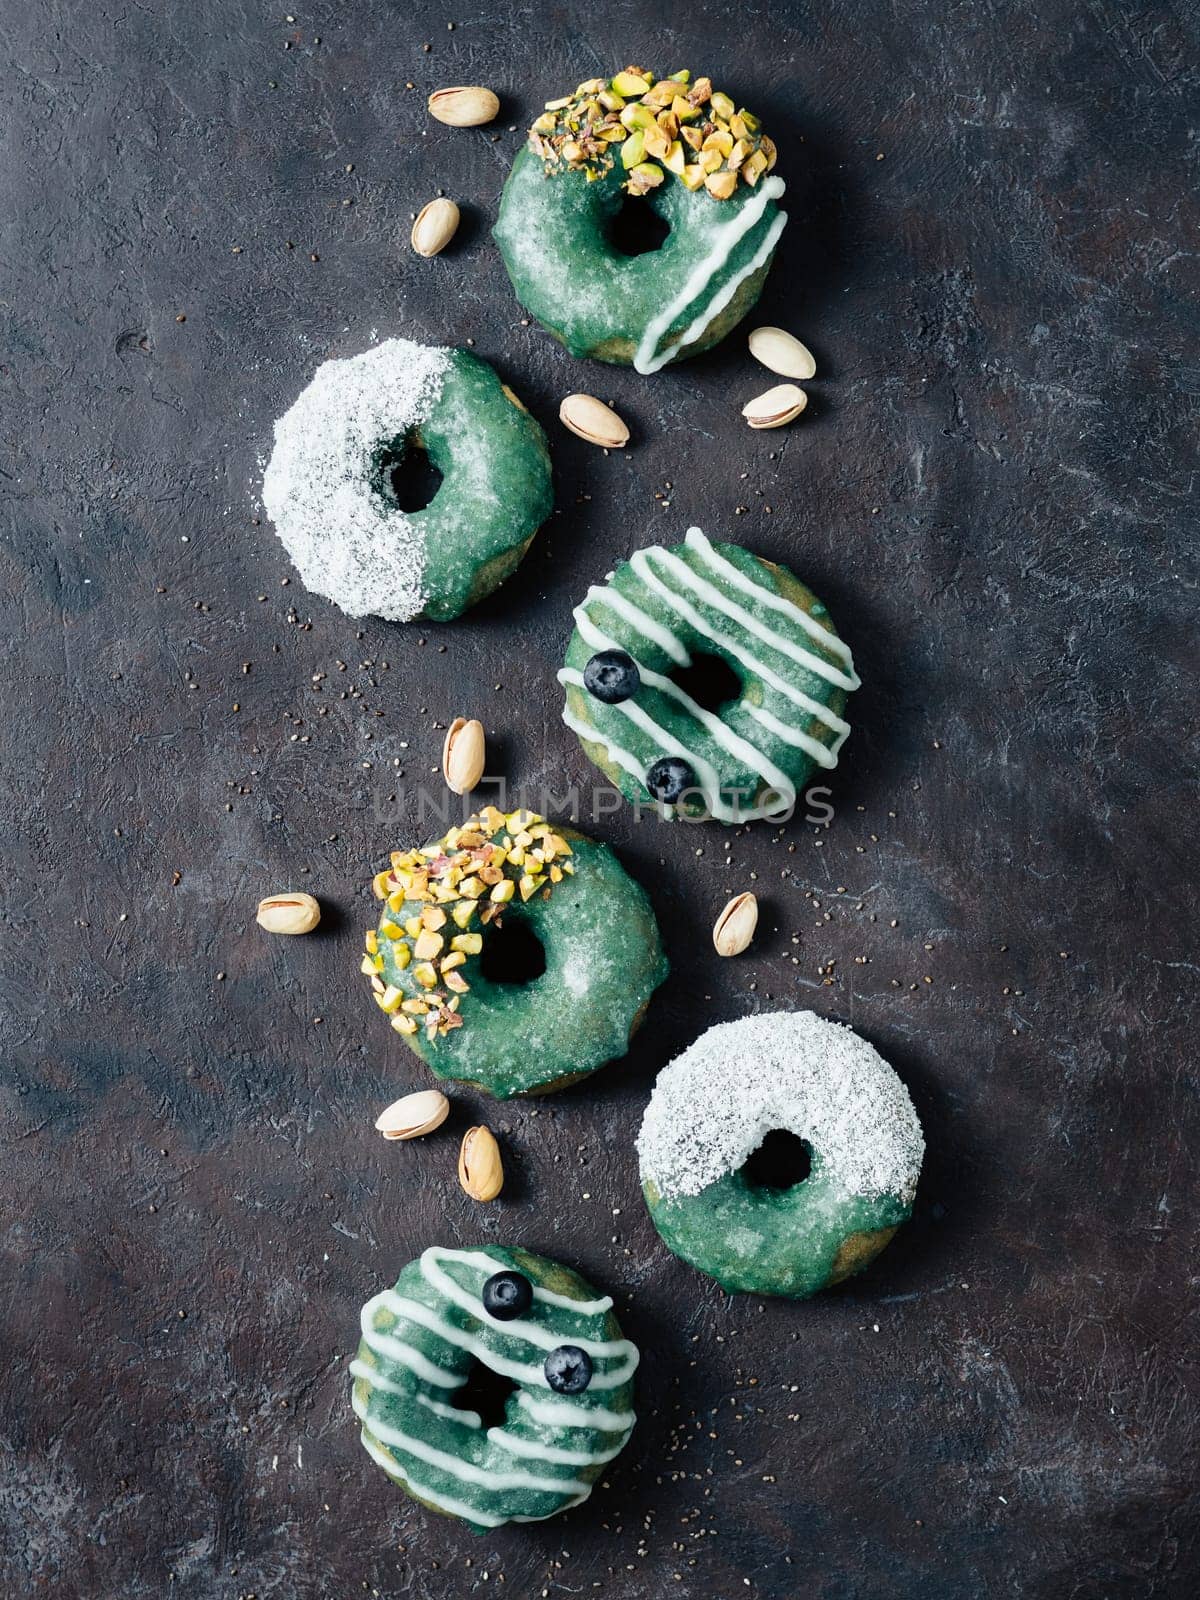 Vegan doughnuts with chia seeds topped with healthy spirulina glaze with pistachio, desiccated coconut and blueberry. Blue green spirulina donuts, on black background, top view or flat lay. Vertical